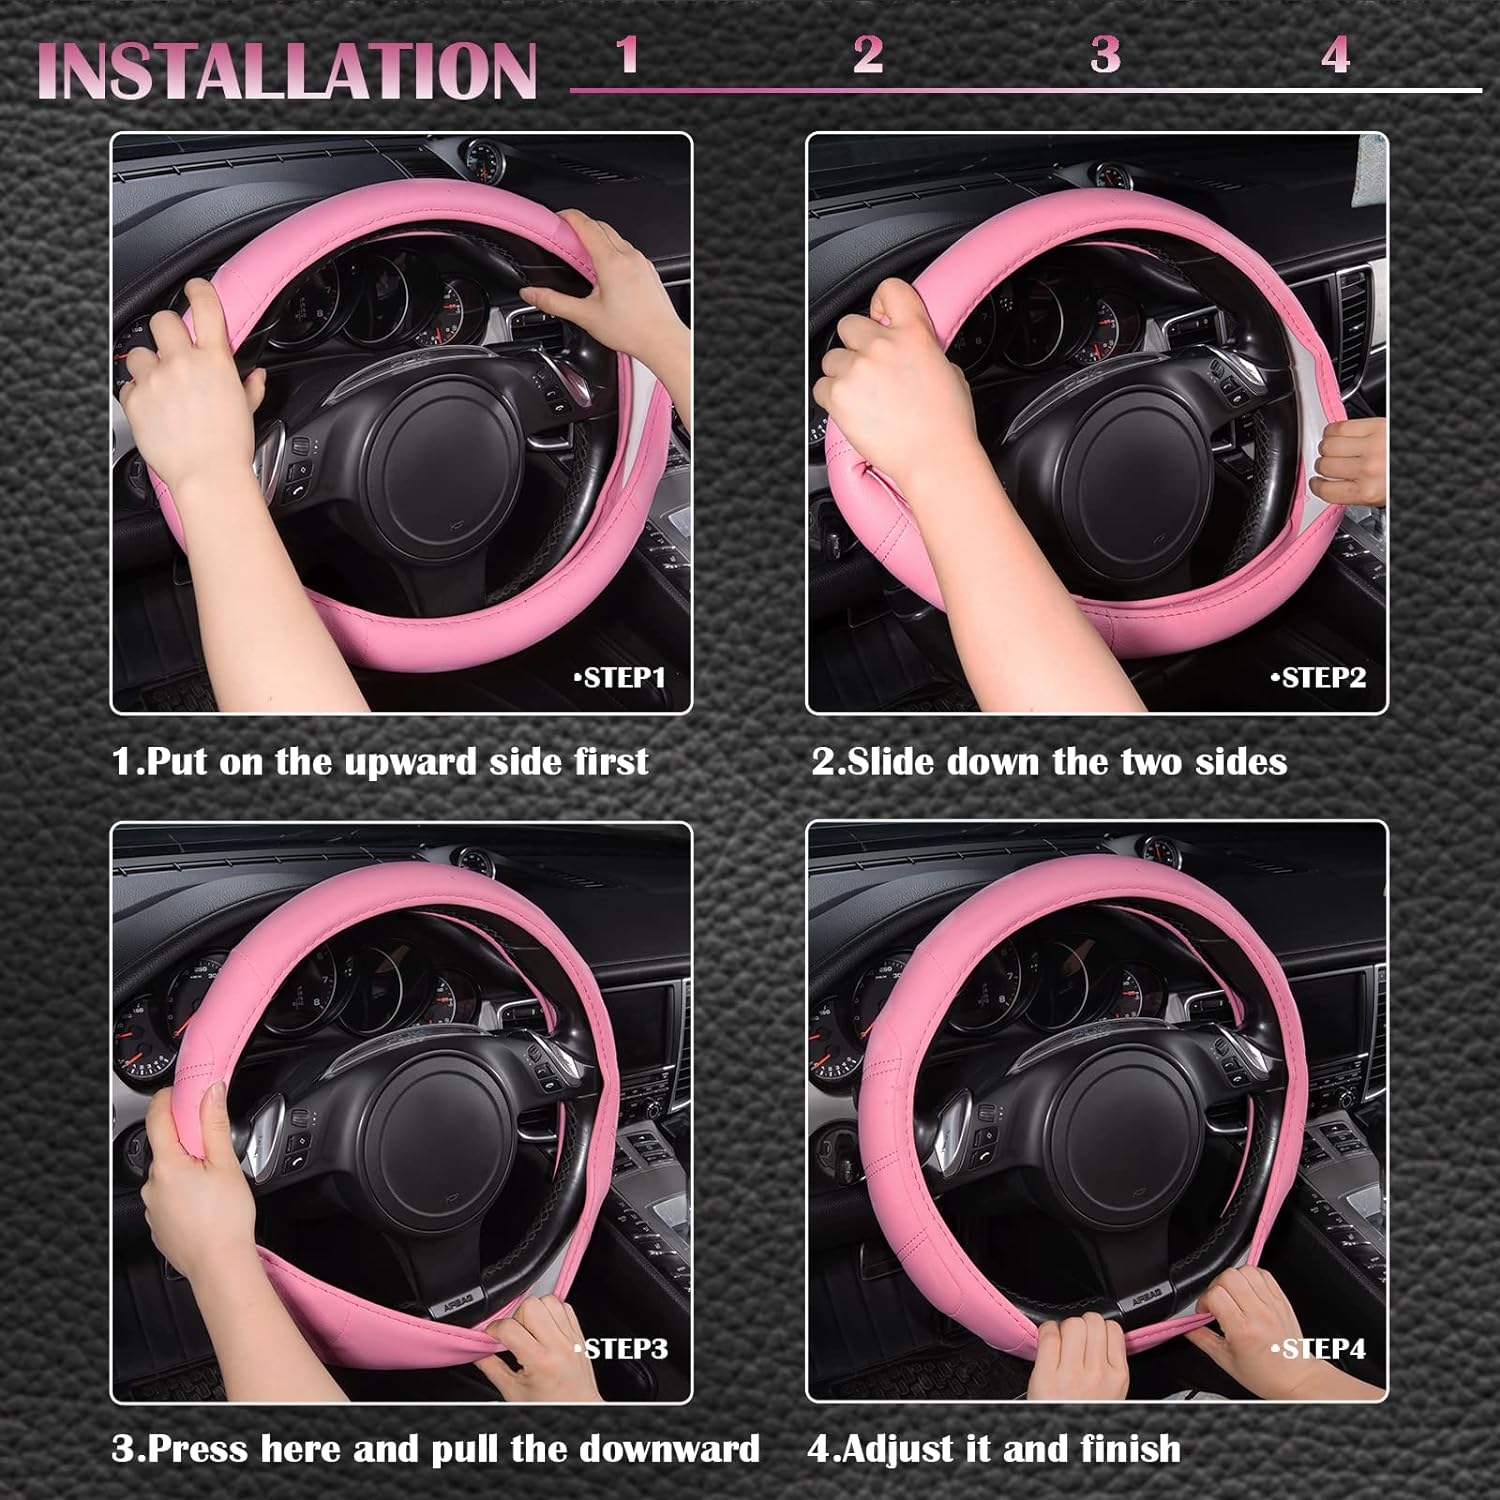 CAR PASS Barbie Pink Nappa Waterproof Leather Car Seat Covers Full Sets Cushion Breathable Protector Universal Fit for Car Sedan SUV Pickup Truck